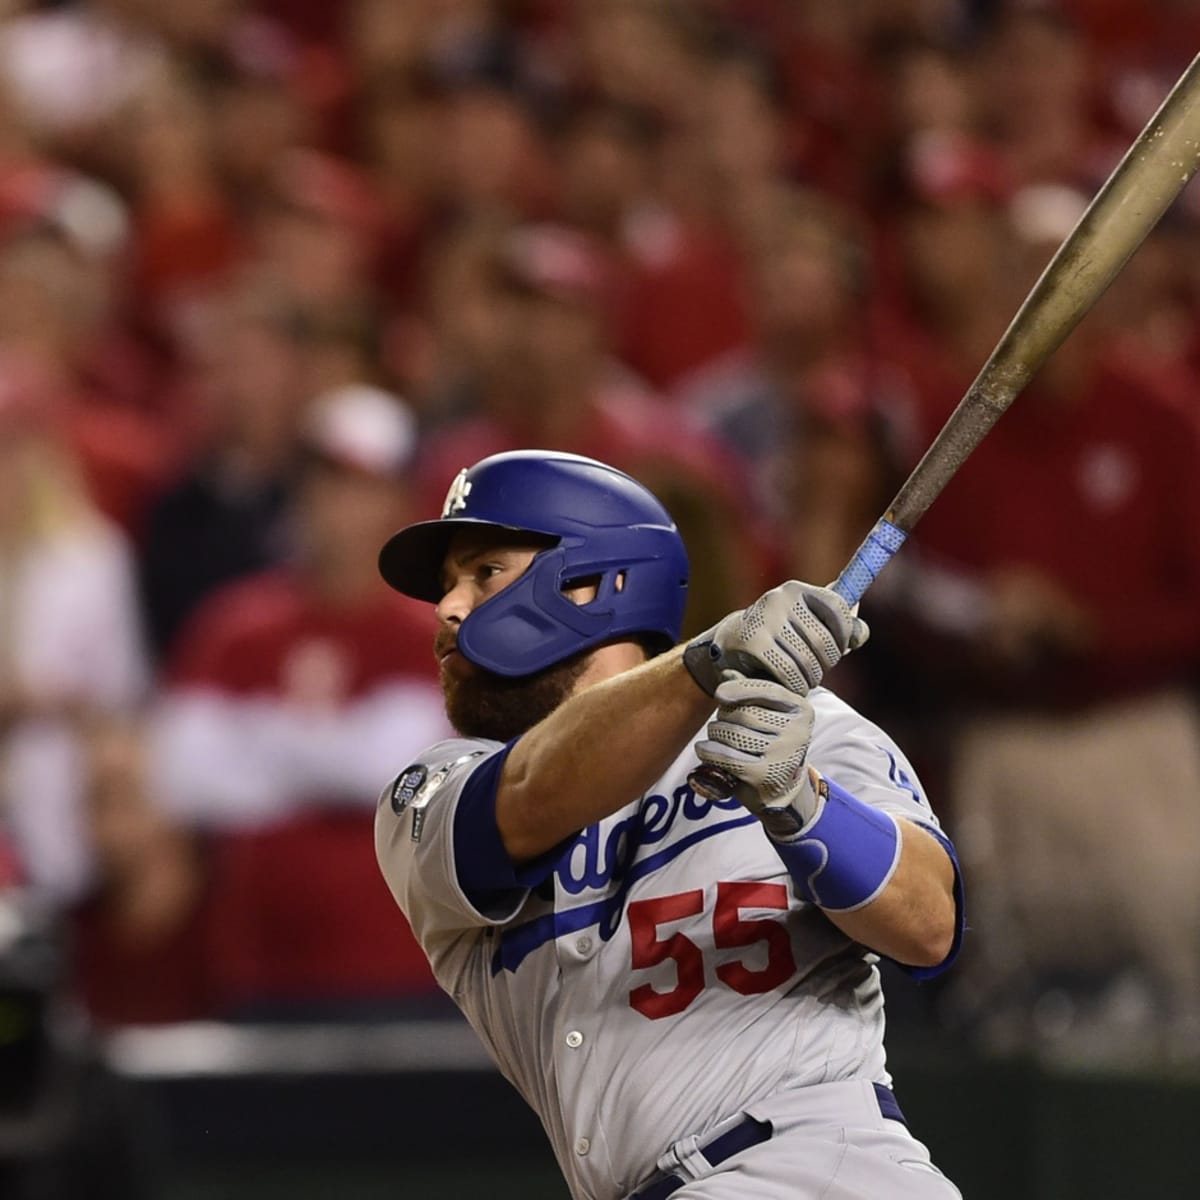 Former Dodgers catcher Russell Martin officially retires from